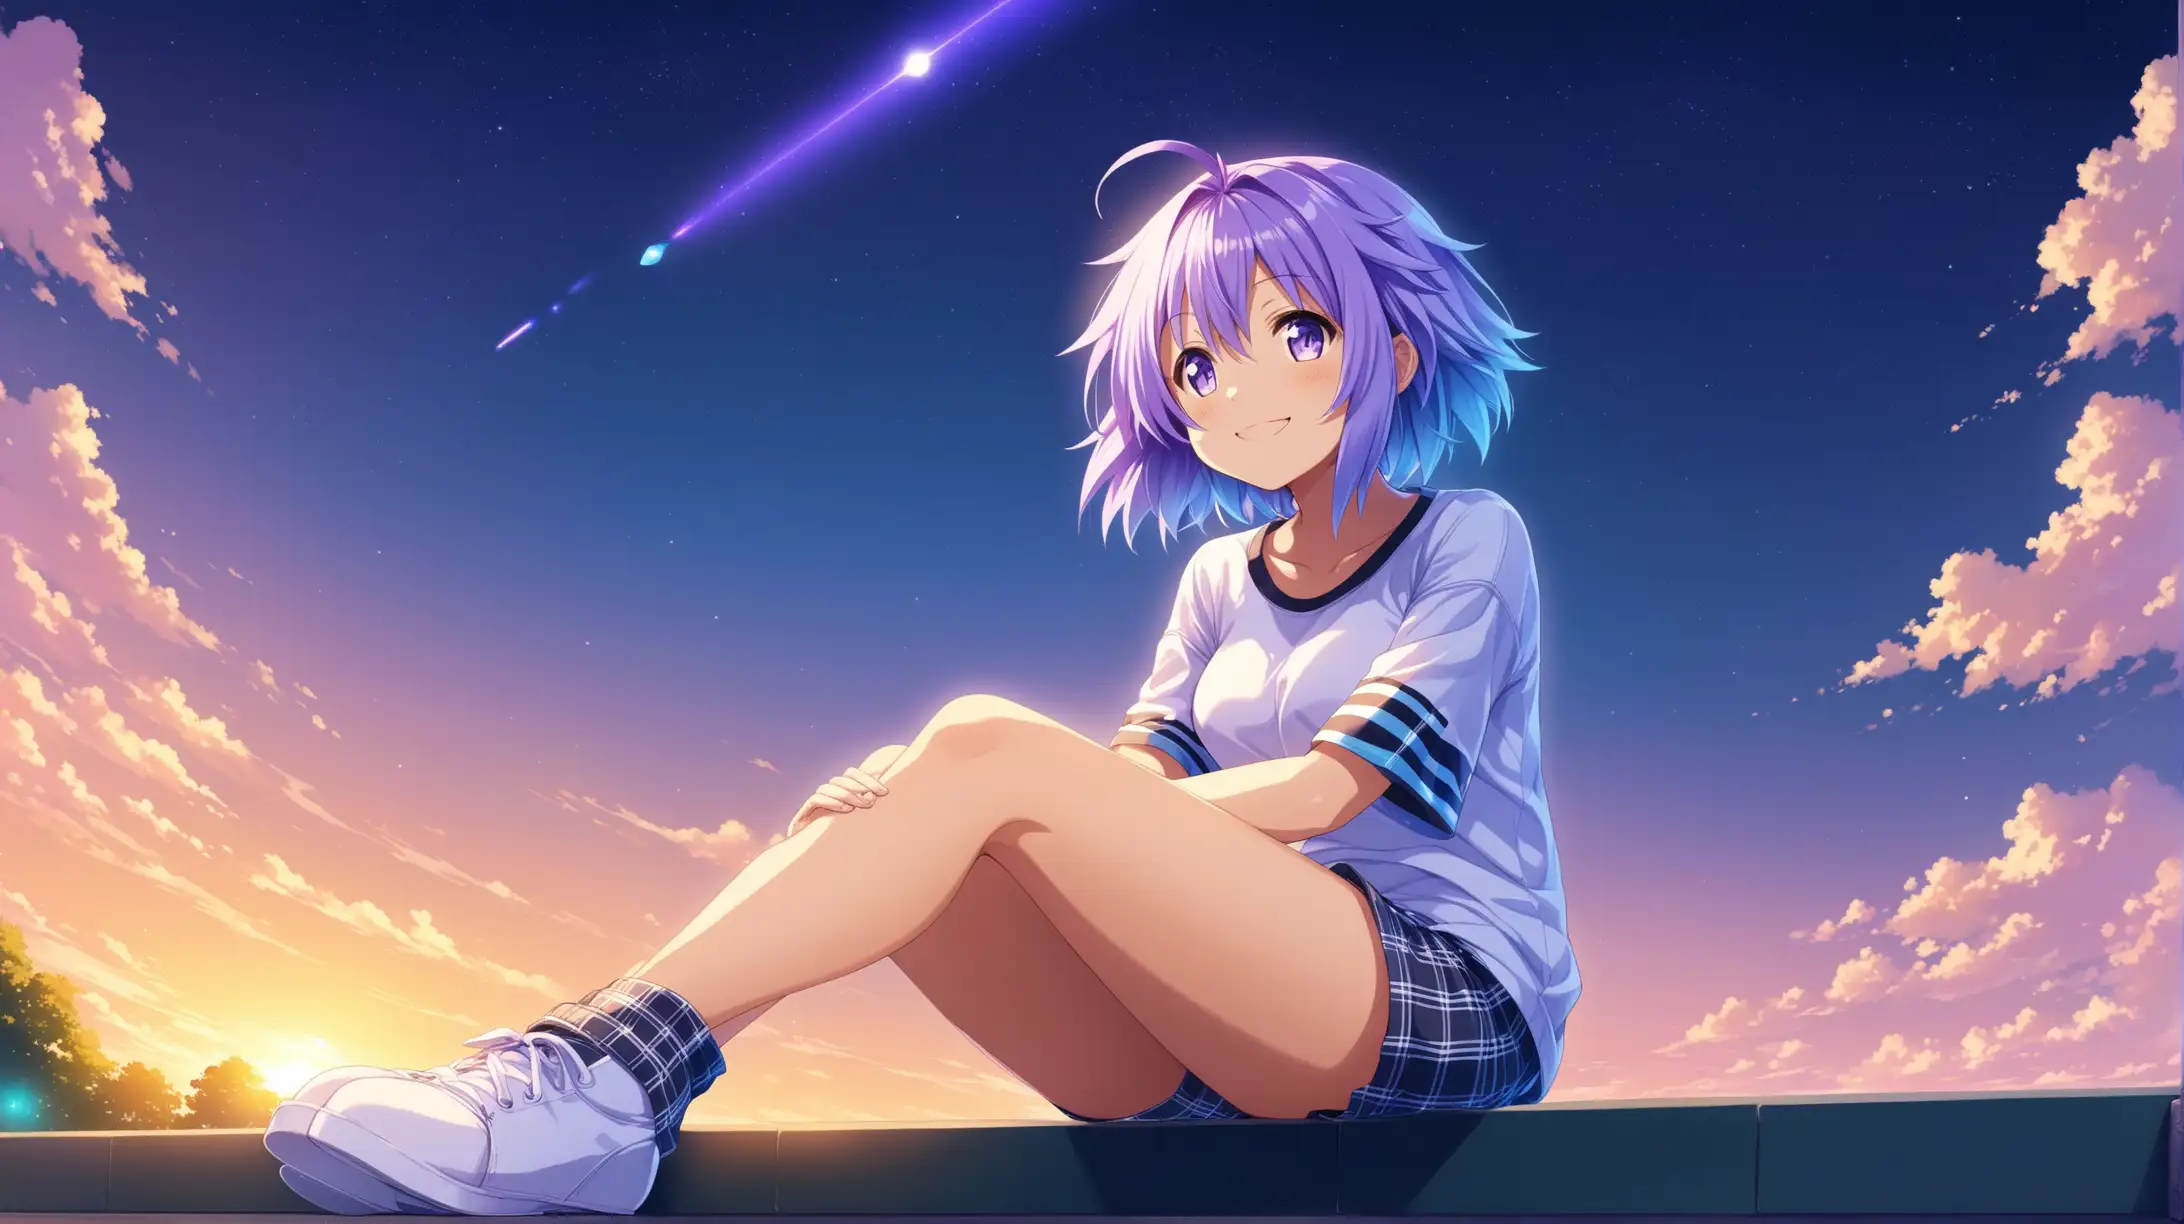 Draw the character Neptune from Hyperdimension Neptunia, short hair, high quality, ambient lighting, long shot, outdoors, low angle, sitting, looking up at the sky, wearing a casual outfit, smiling